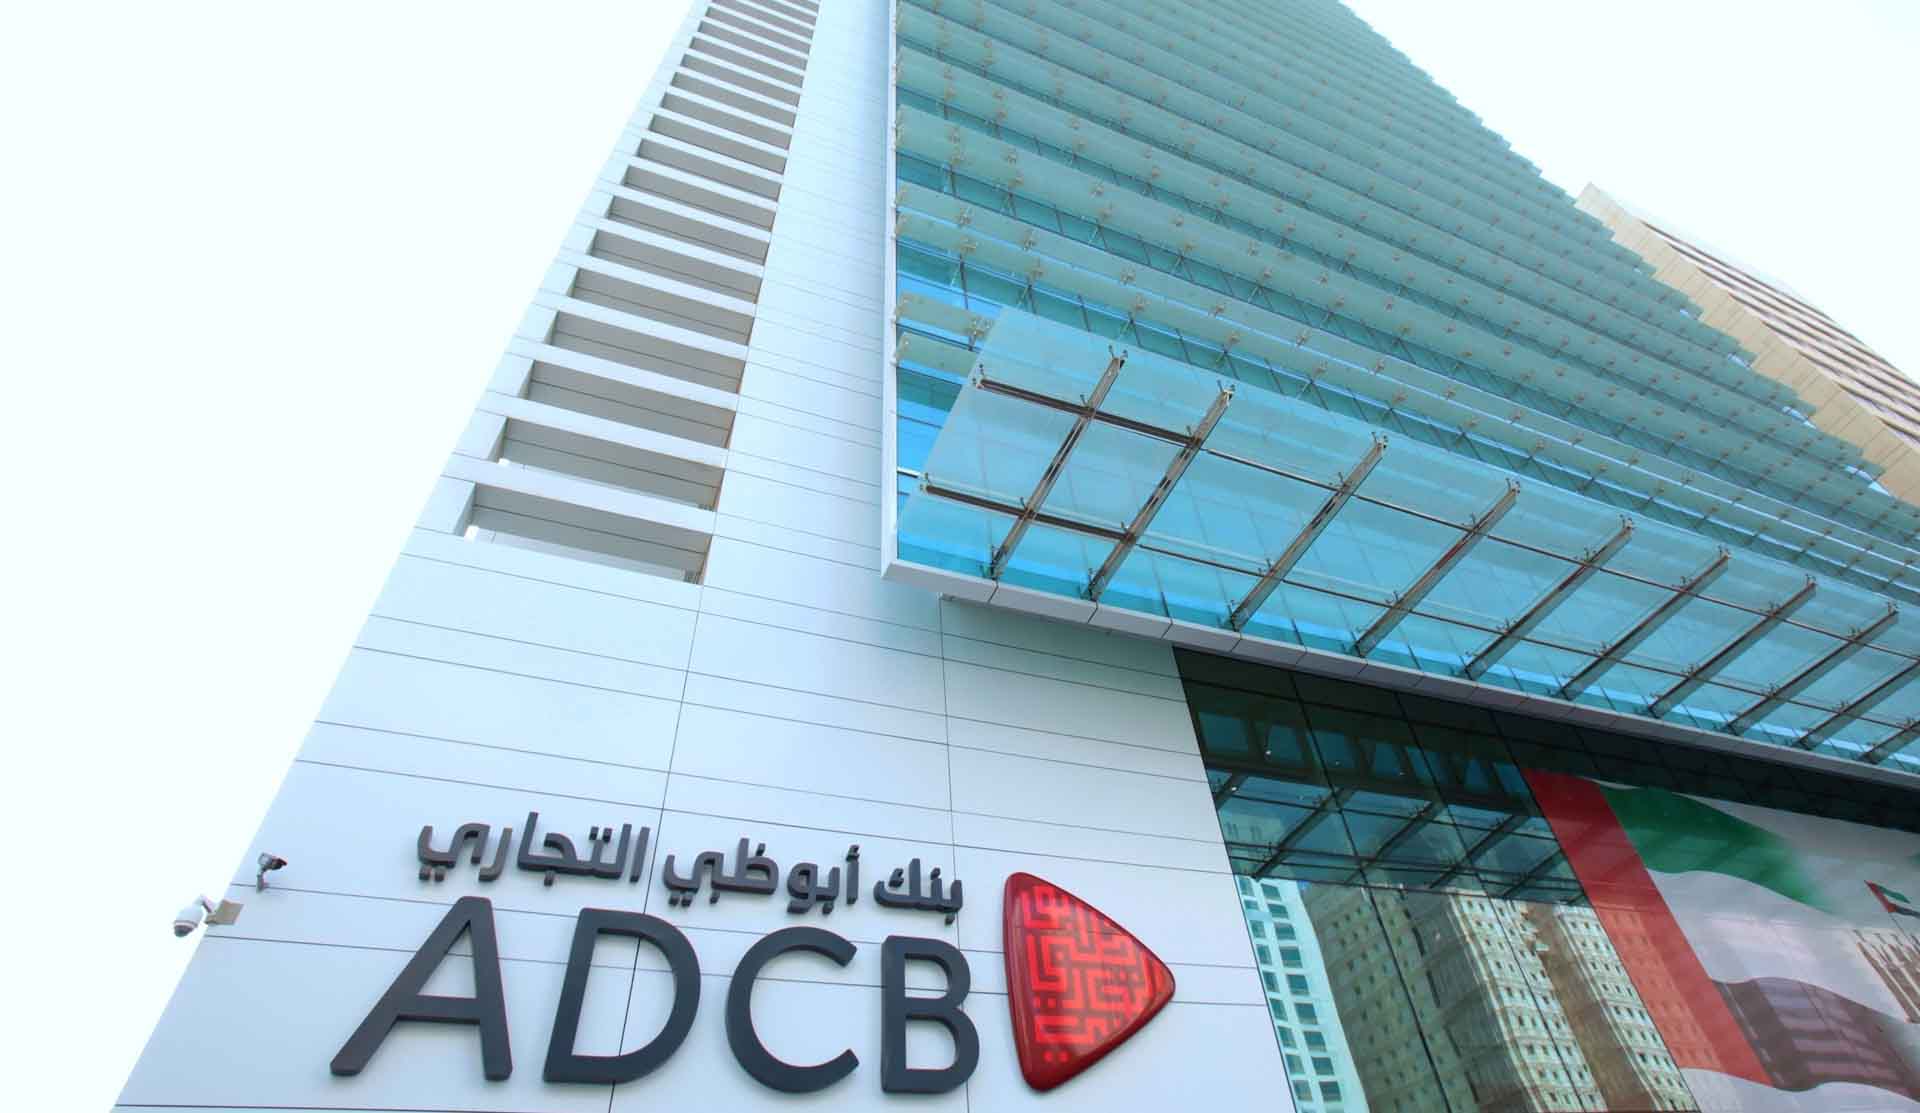 ADCB sees 27 percent increase in Q1 23 net profit reaching AED 1.87 billion